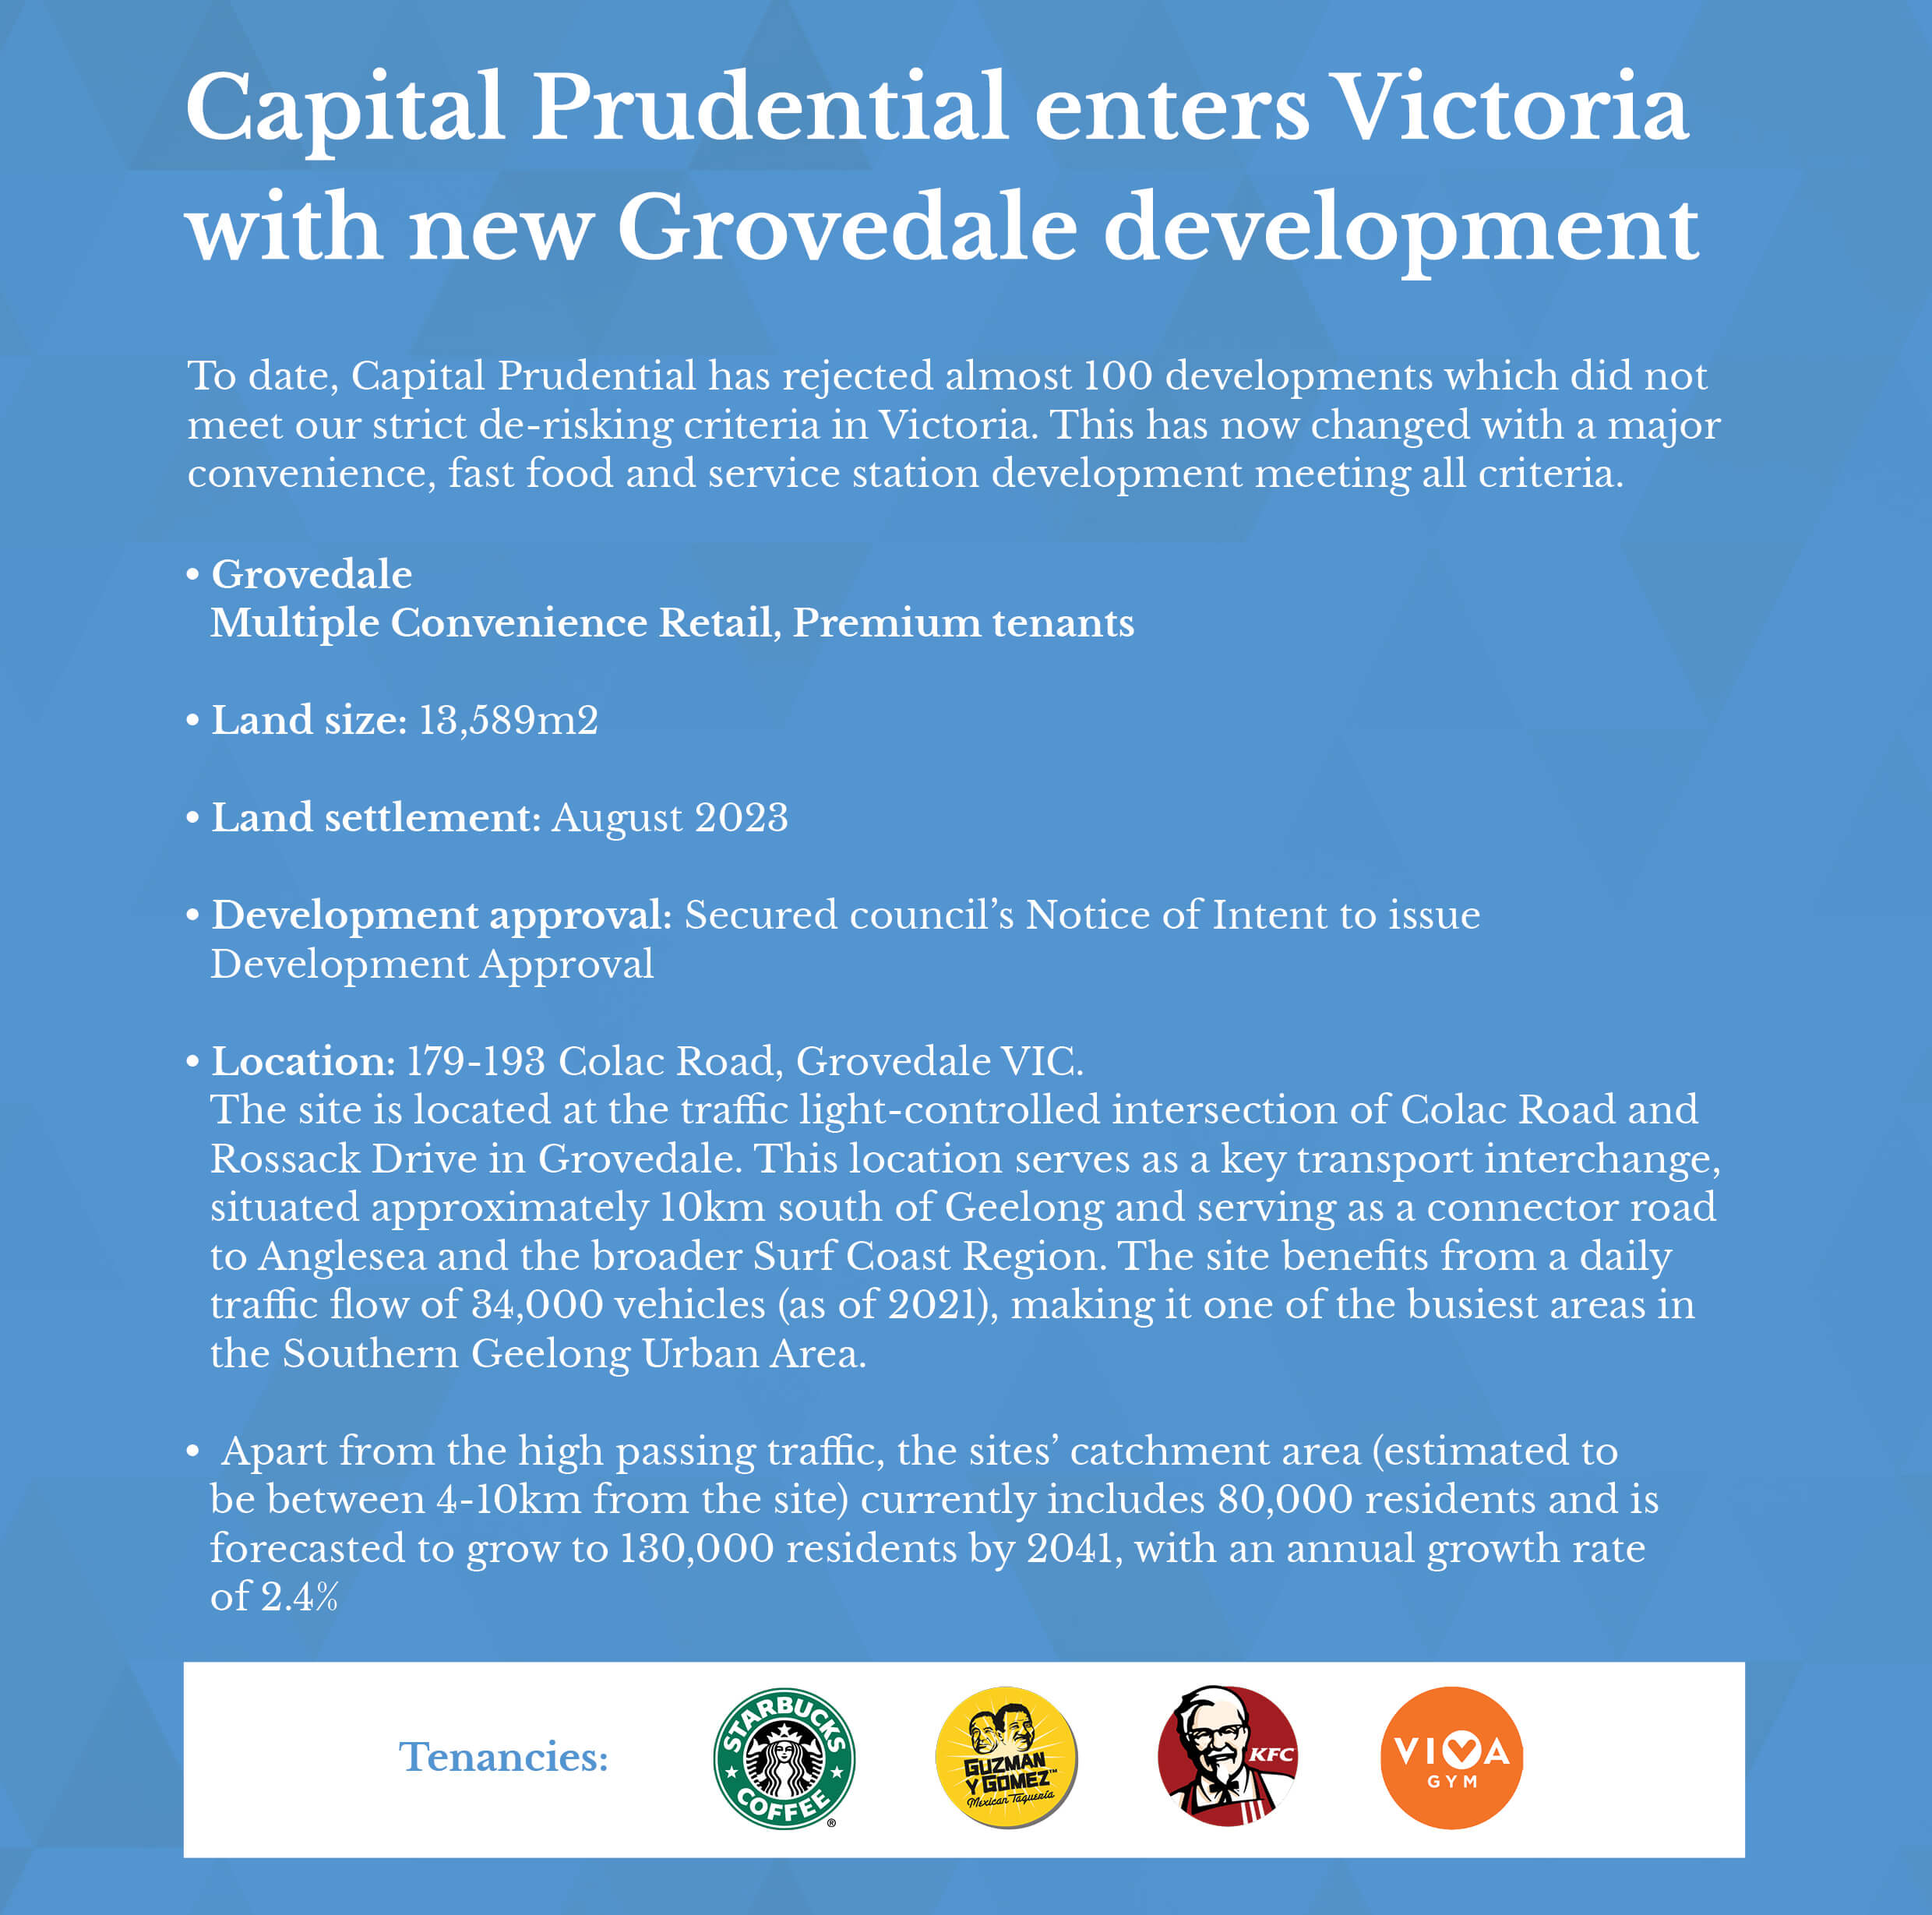 Capital Prudential enters Victoria with new Grovedale development